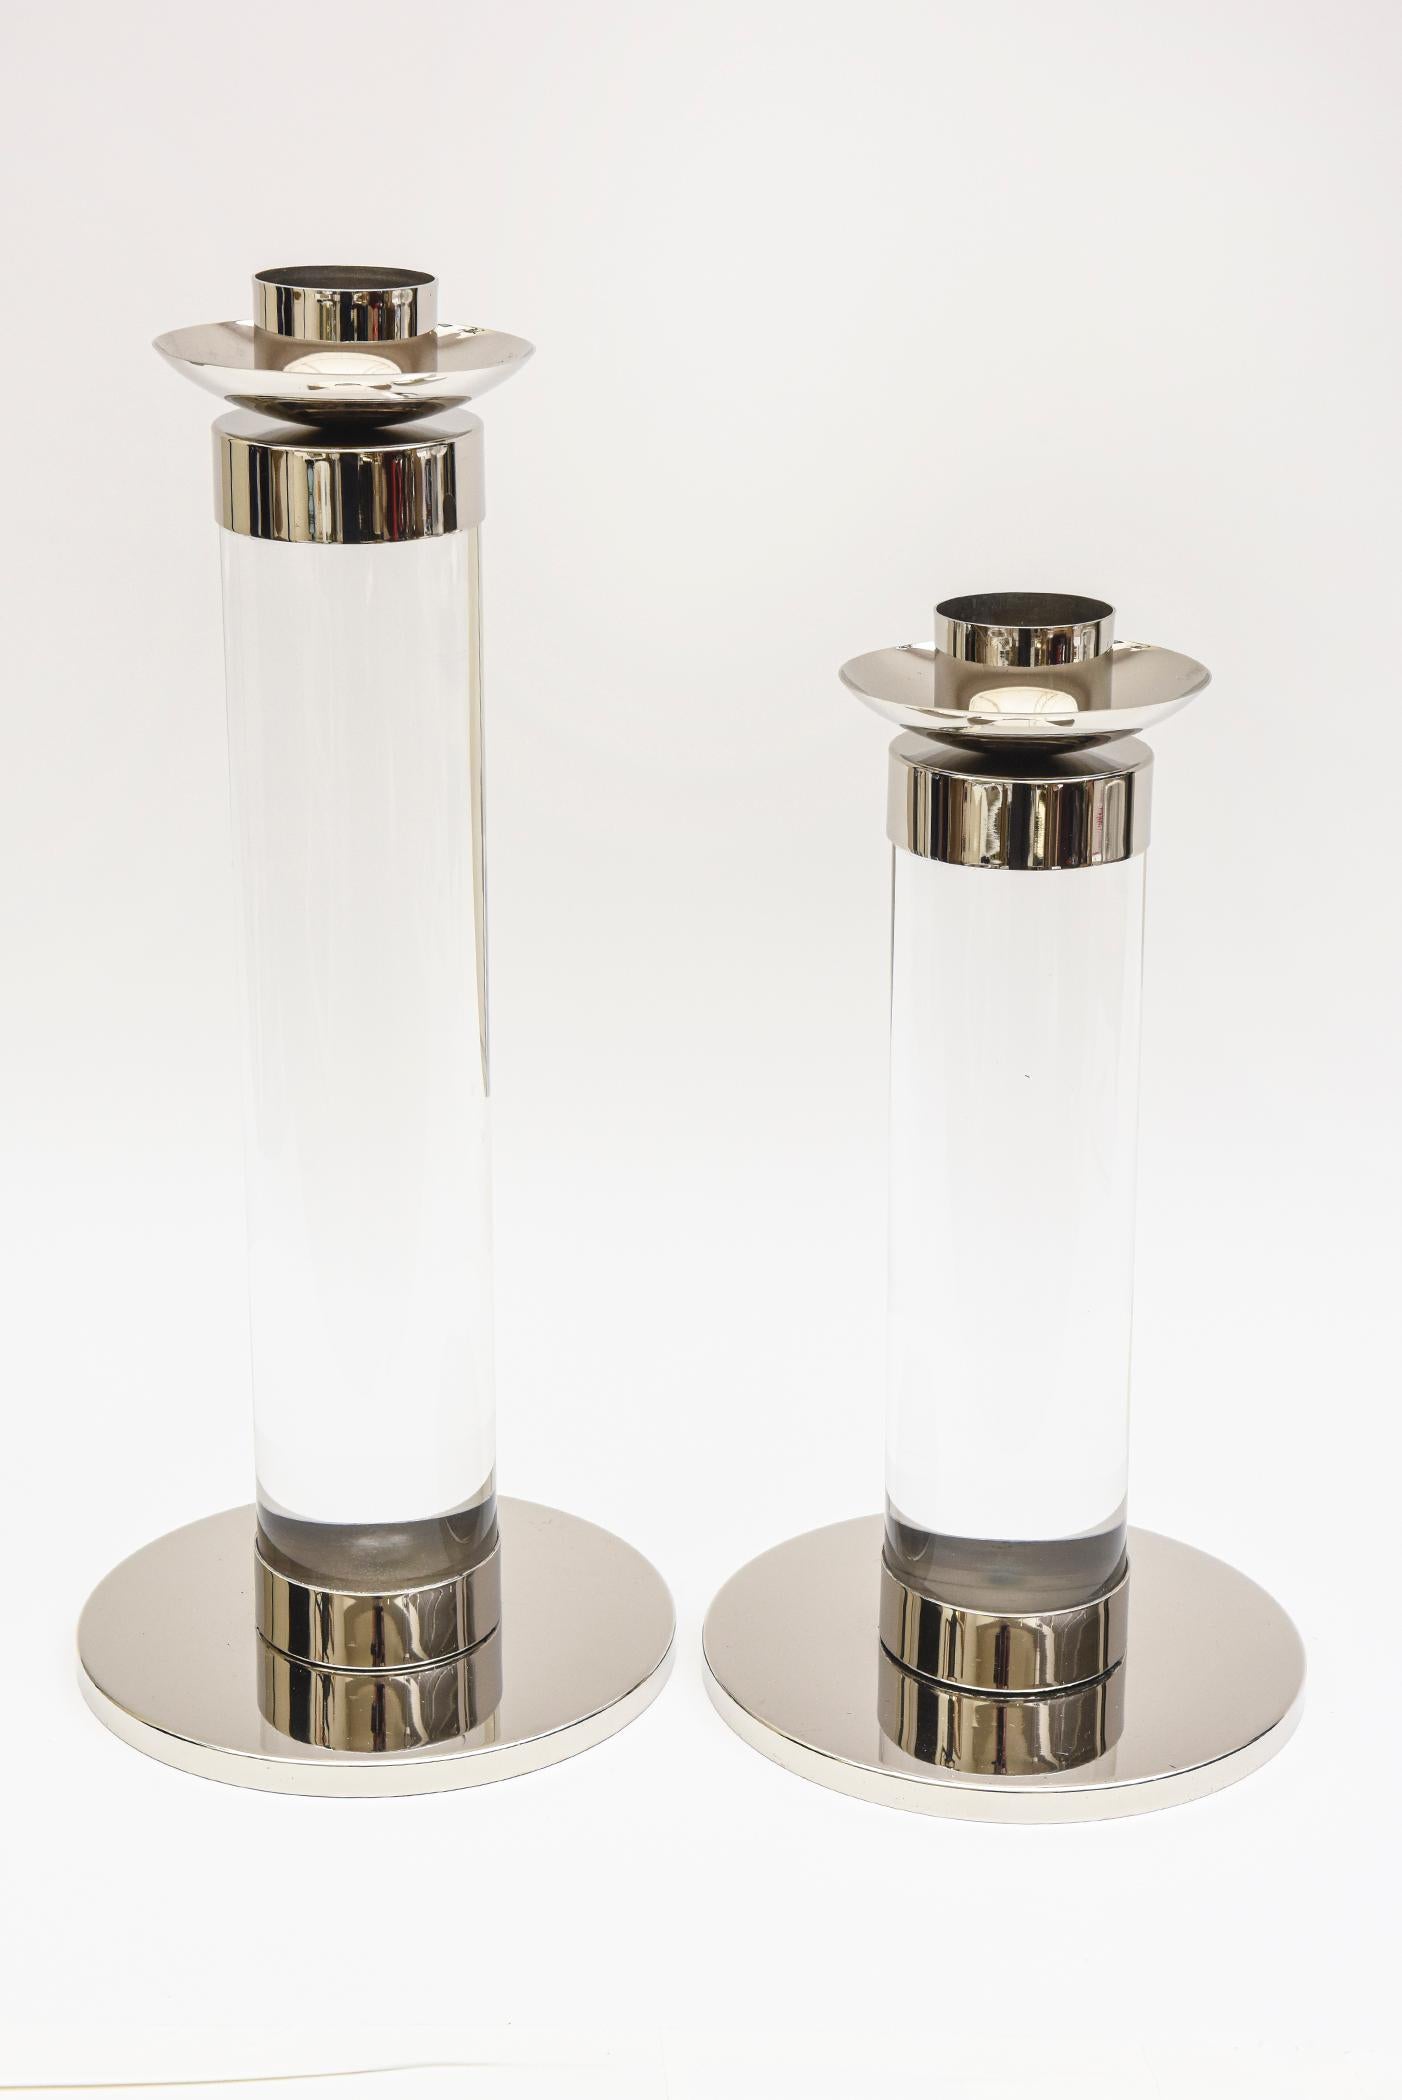 This pair of chic chunky thick Karl Springer style lucite and chrome column candlesticks are monumental. They are 2 different heights. The larger one is 18.5